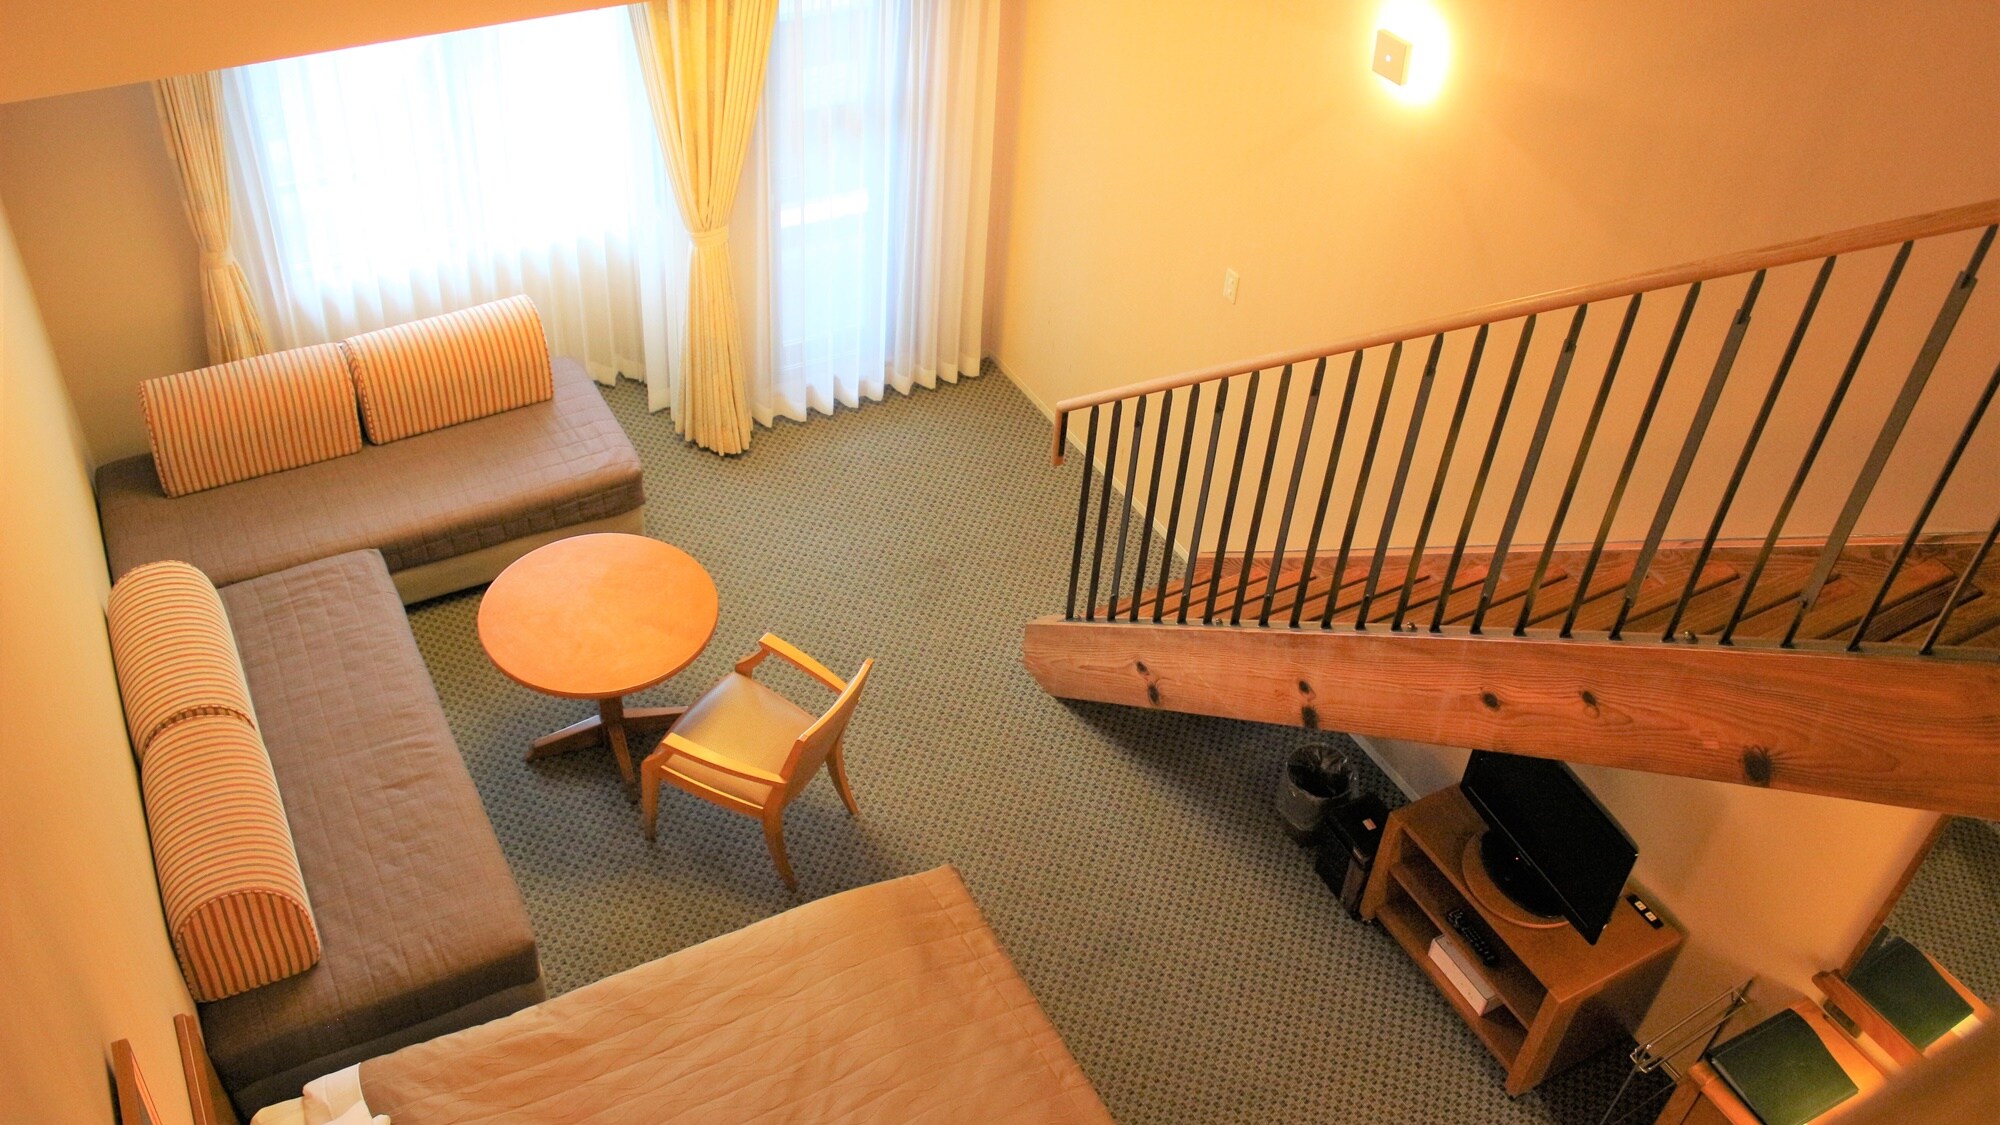 Recommended for families and groups! A maisonette type Western-style room with 1st and 2nd floors.